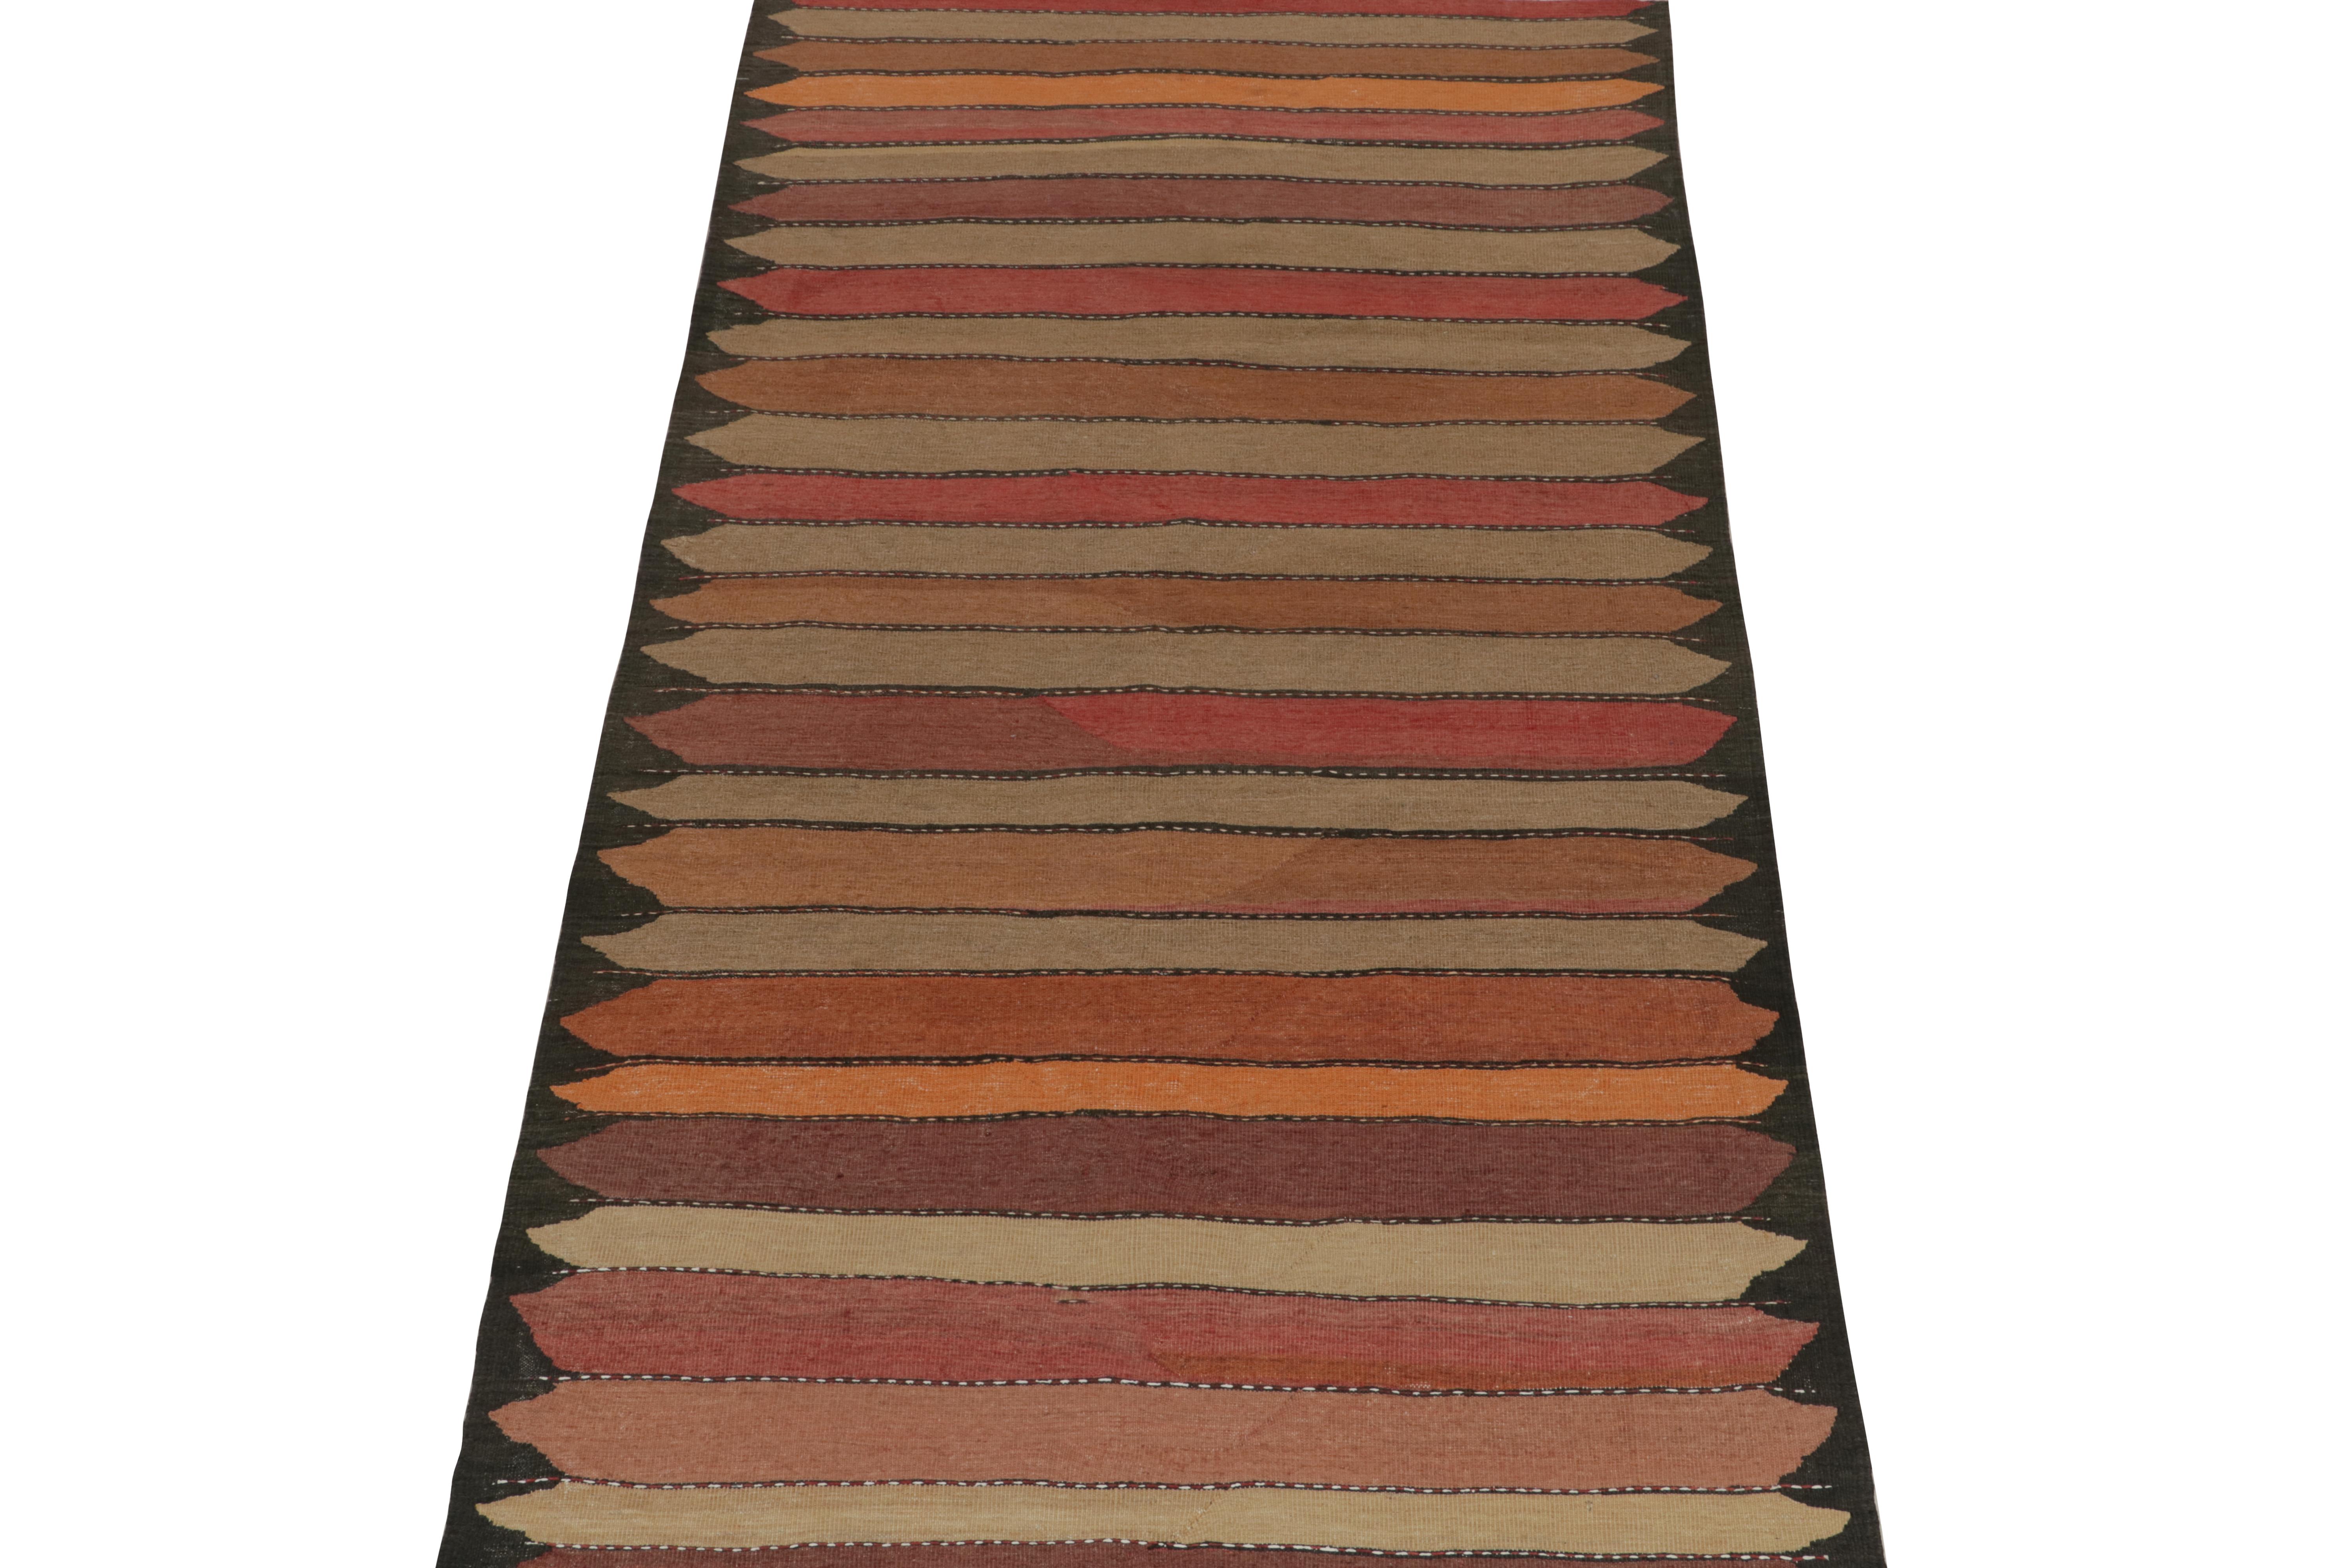 This vintage 5x11 Persian Kilim is a unique tribal rug for its period that hails from Northwestern provenance. Hand-knotted in wool, it’s believed to originate from Azerbaijan circa 1950-1960.

Further on the Design:

A deep brown undertone